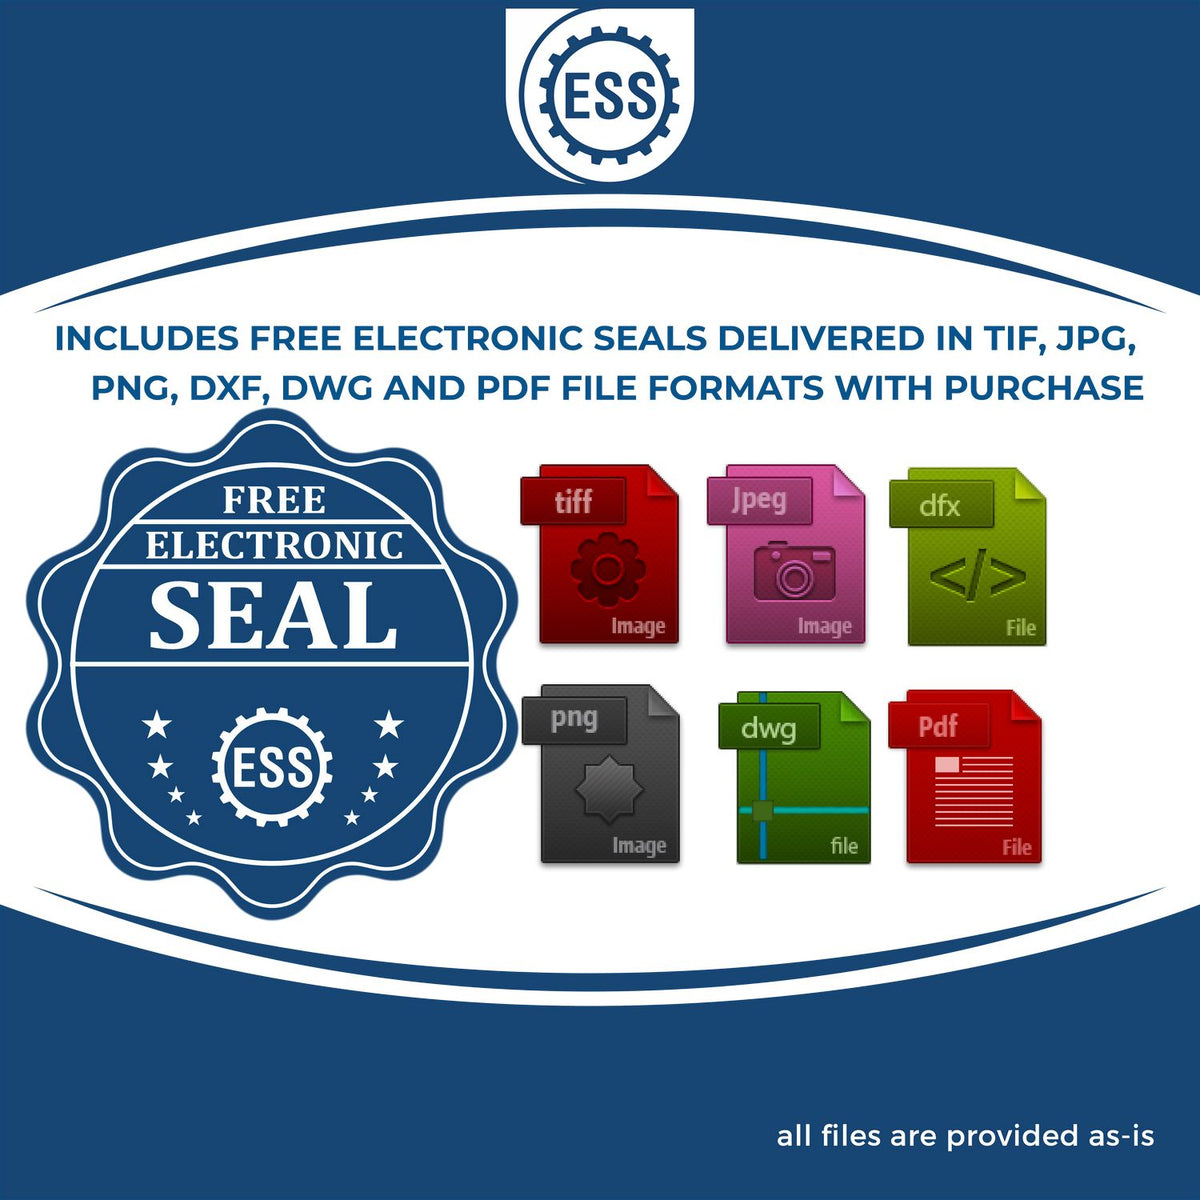 An infographic for the free electronic seal for the Hybrid Arizona Land Surveyor Seal illustrating the different file type icons such as DXF, DWG, TIF, JPG and PNG.